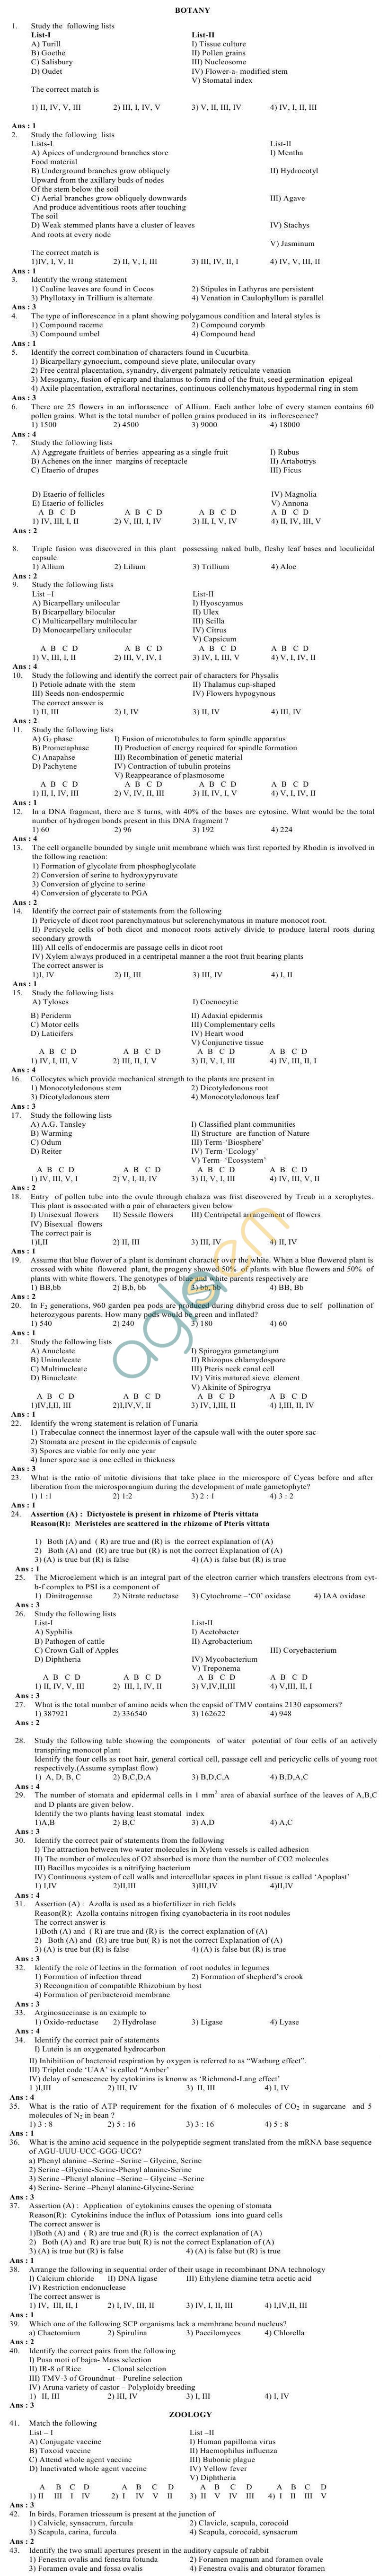 EAMCET 2013 Agriculture and Medical Question Paper with Solutions